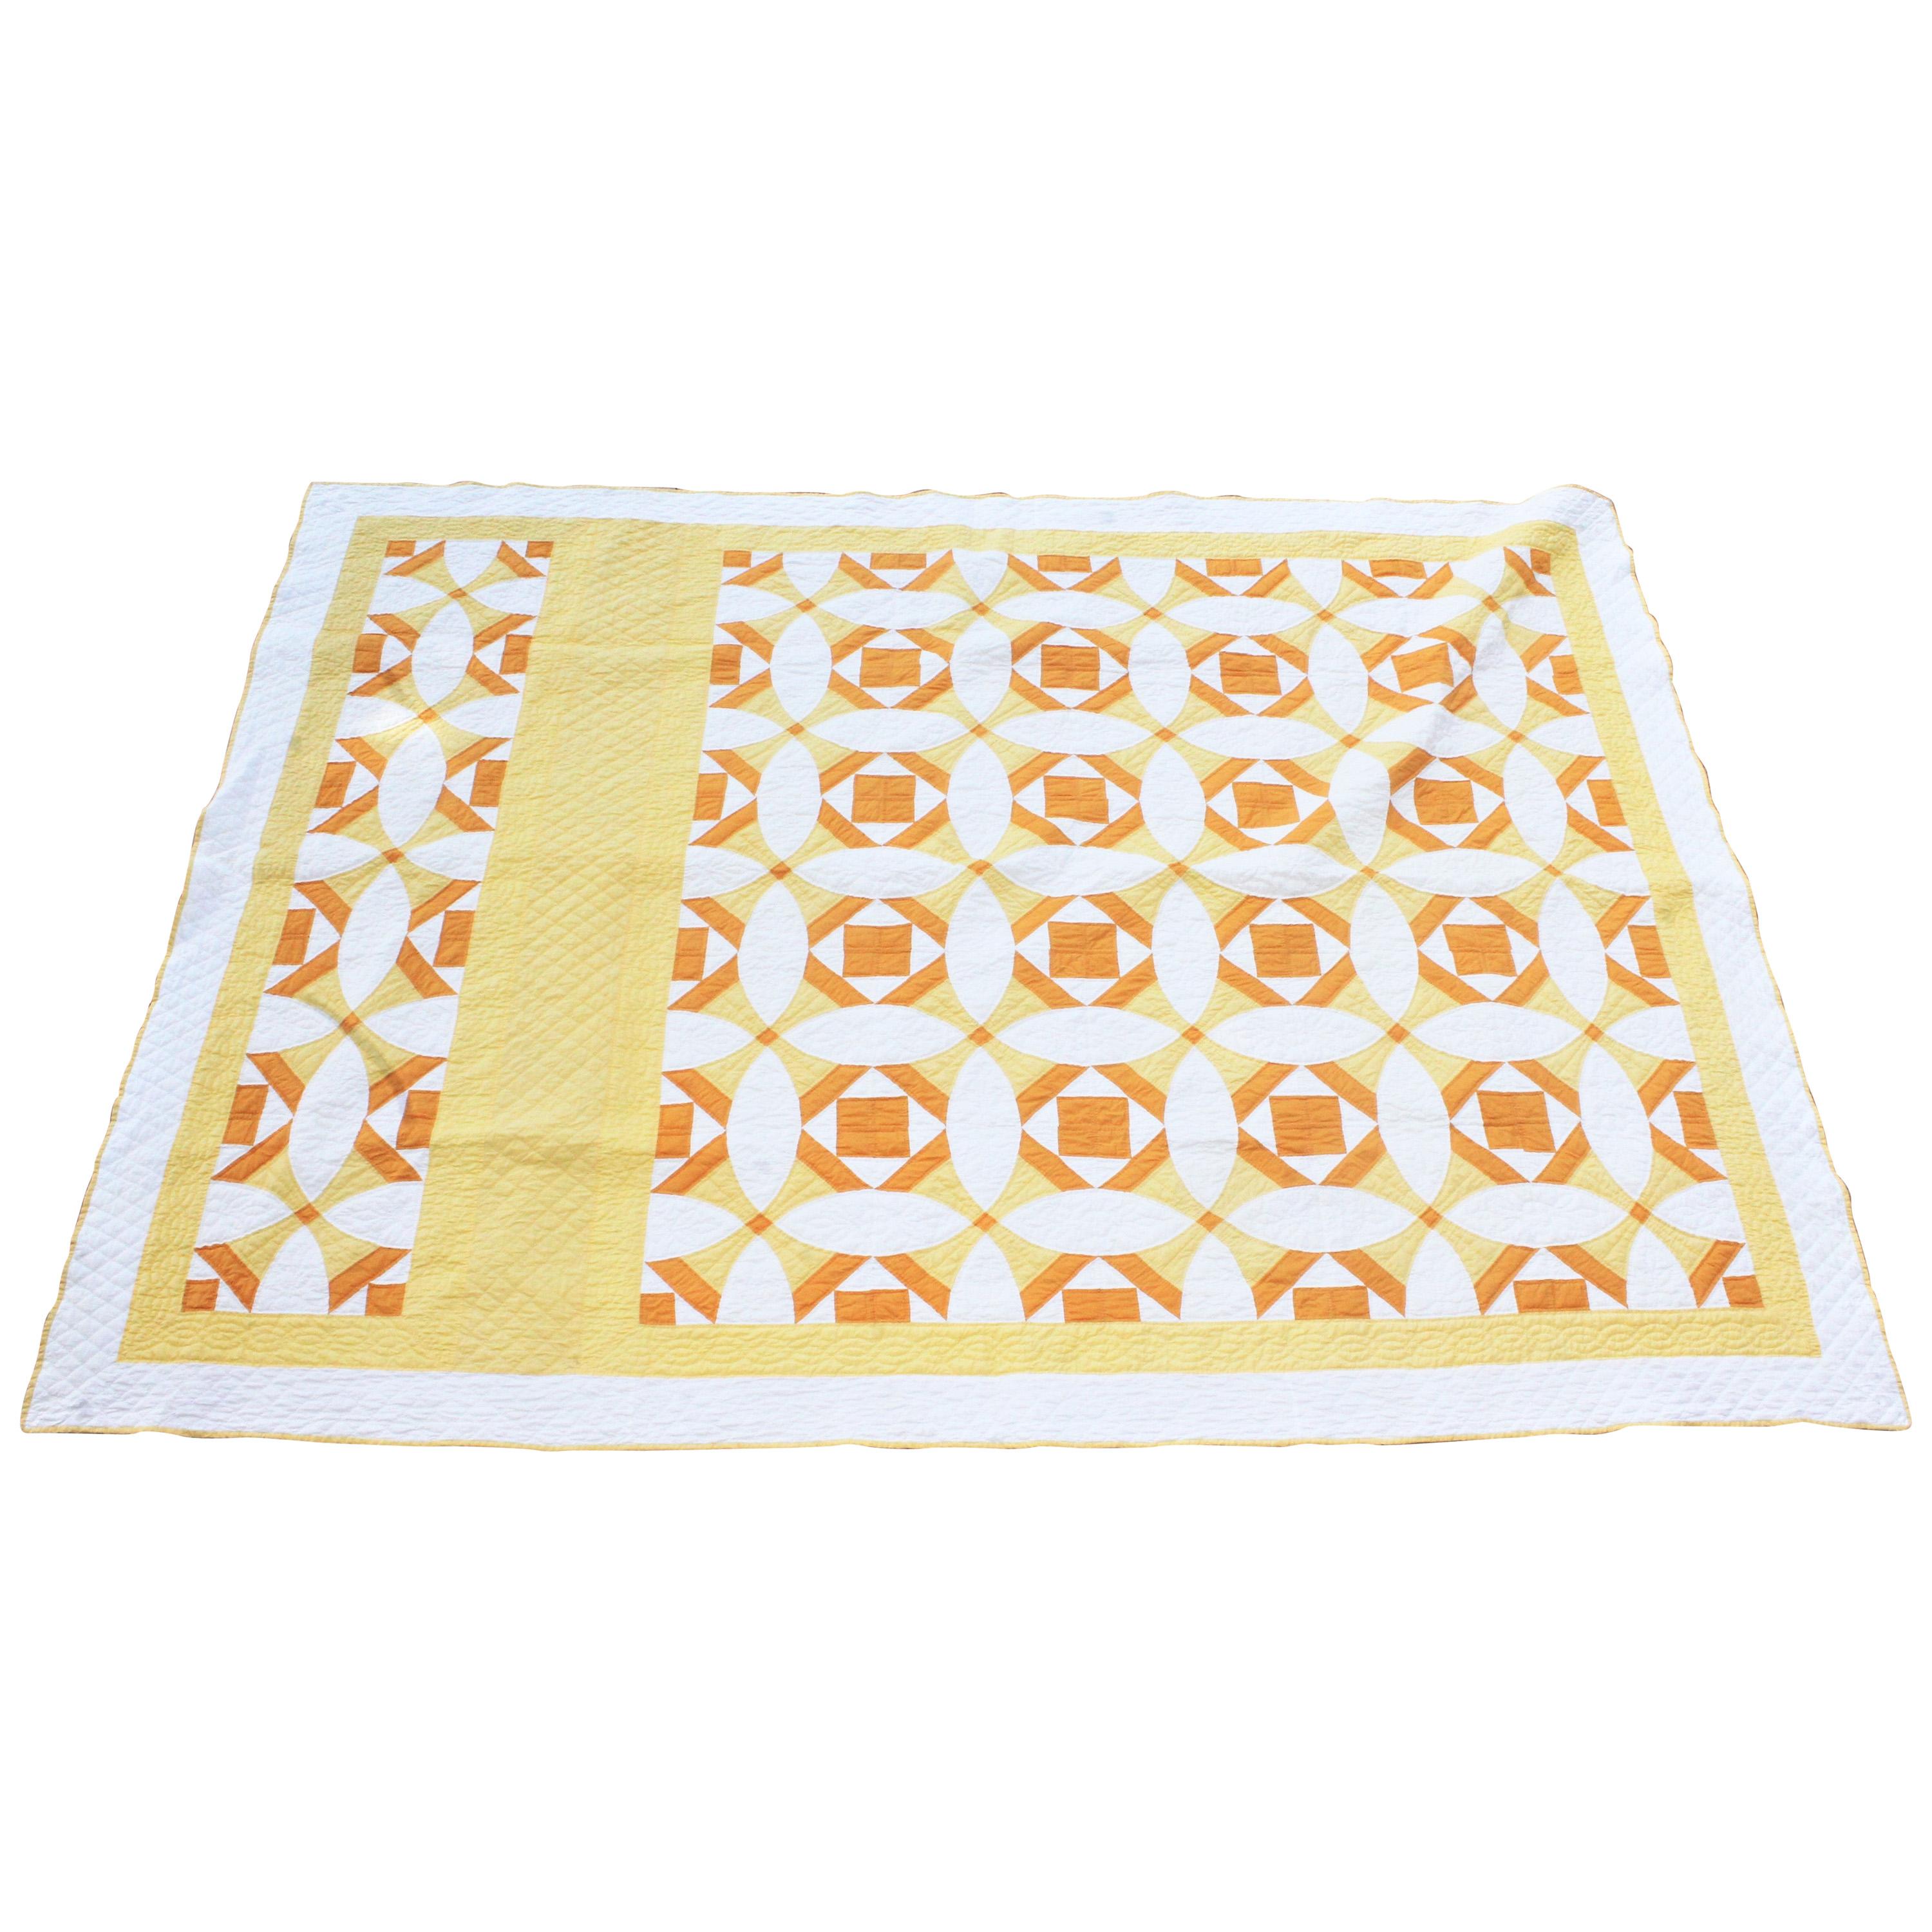 Antique Quilt Yellow and White Geometric Pattern For Sale